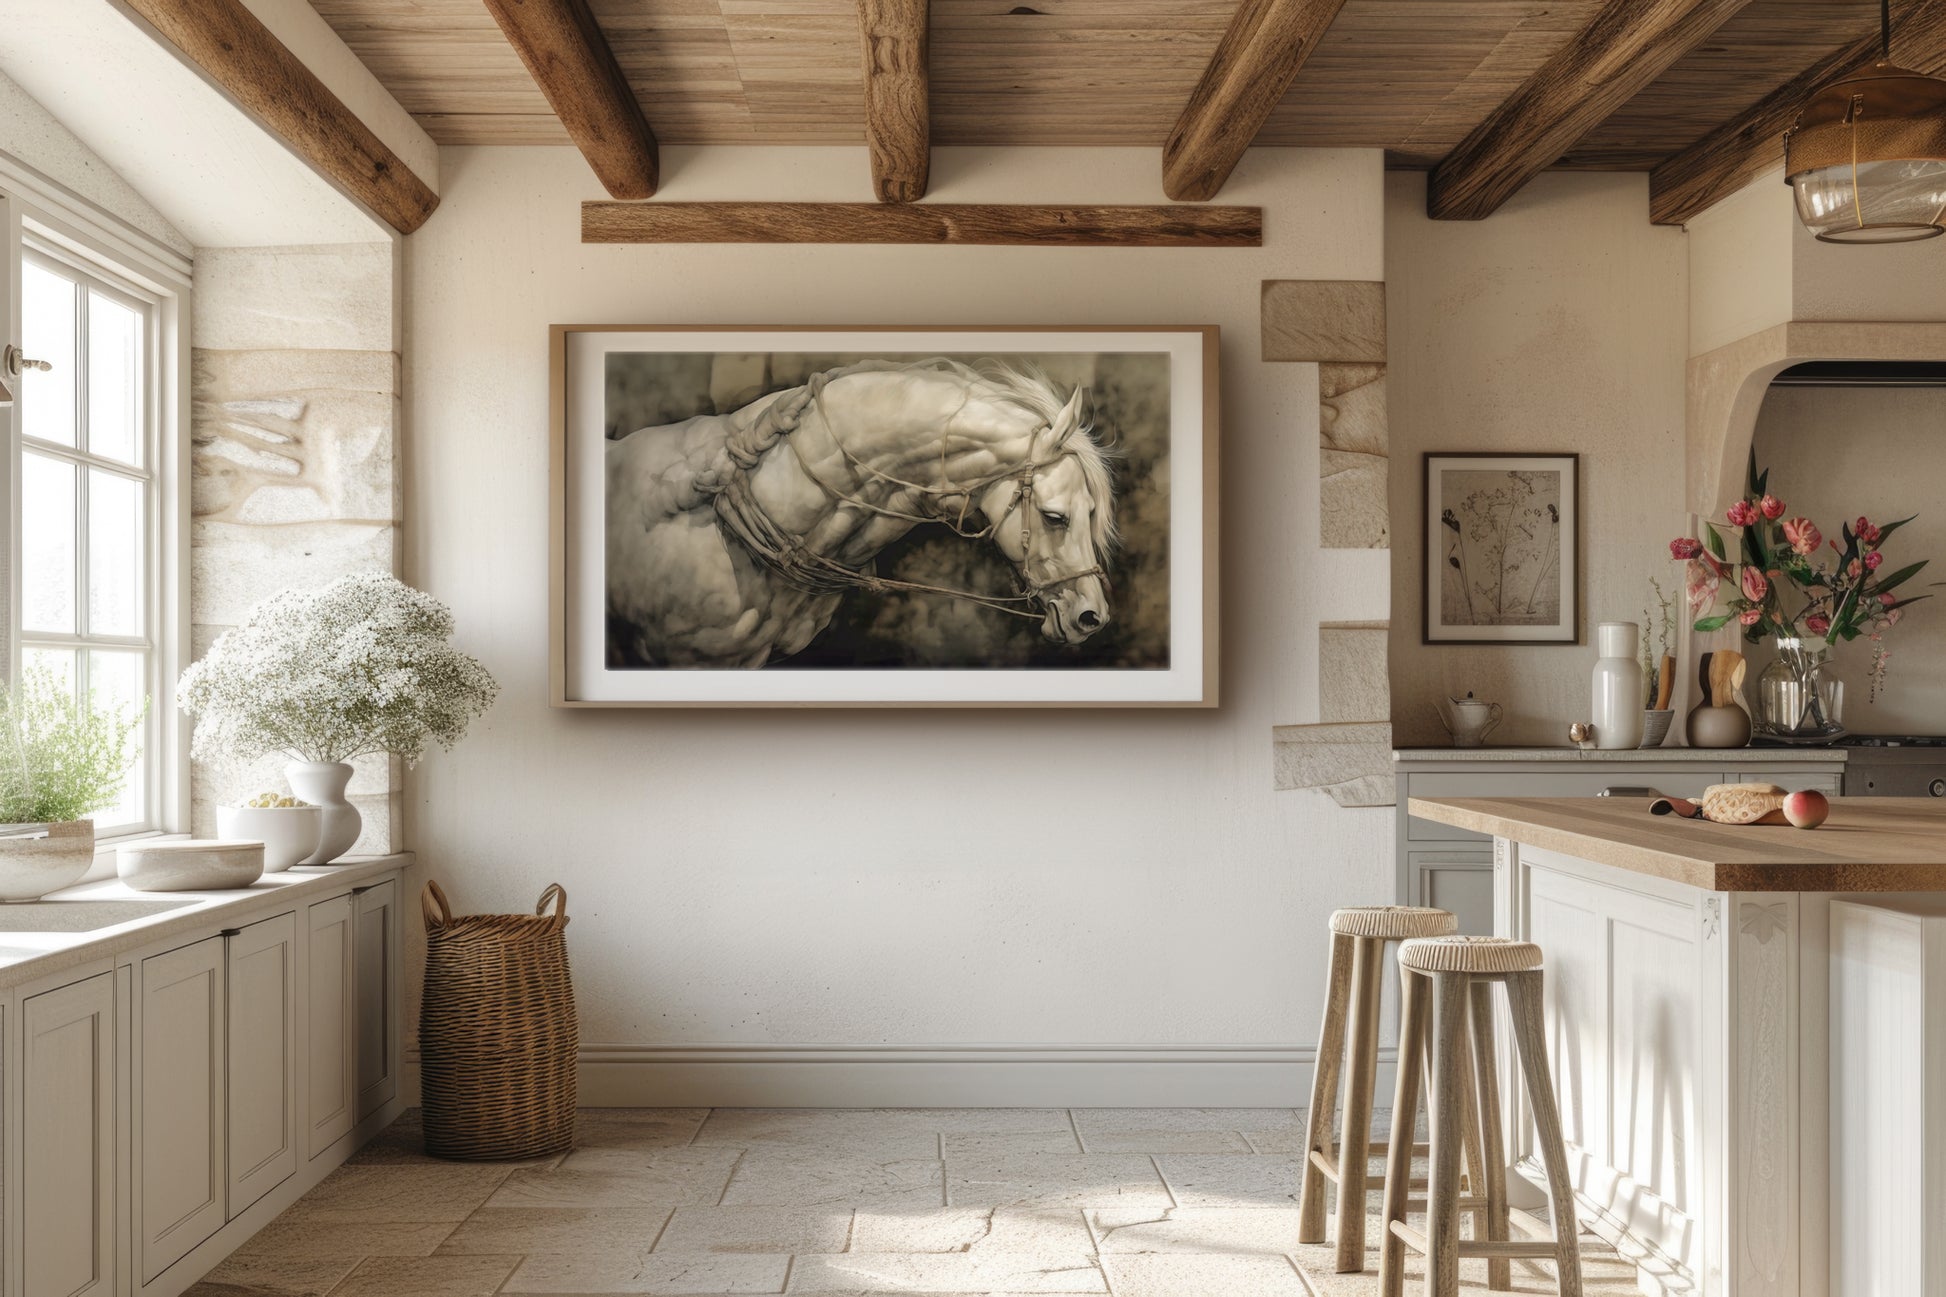 Artwork print featuring a detailed portrayal of a white horse, emphasizing its musculature and harness, set against a rustic, muted backdrop. This fine art print is a timeless visual fable.